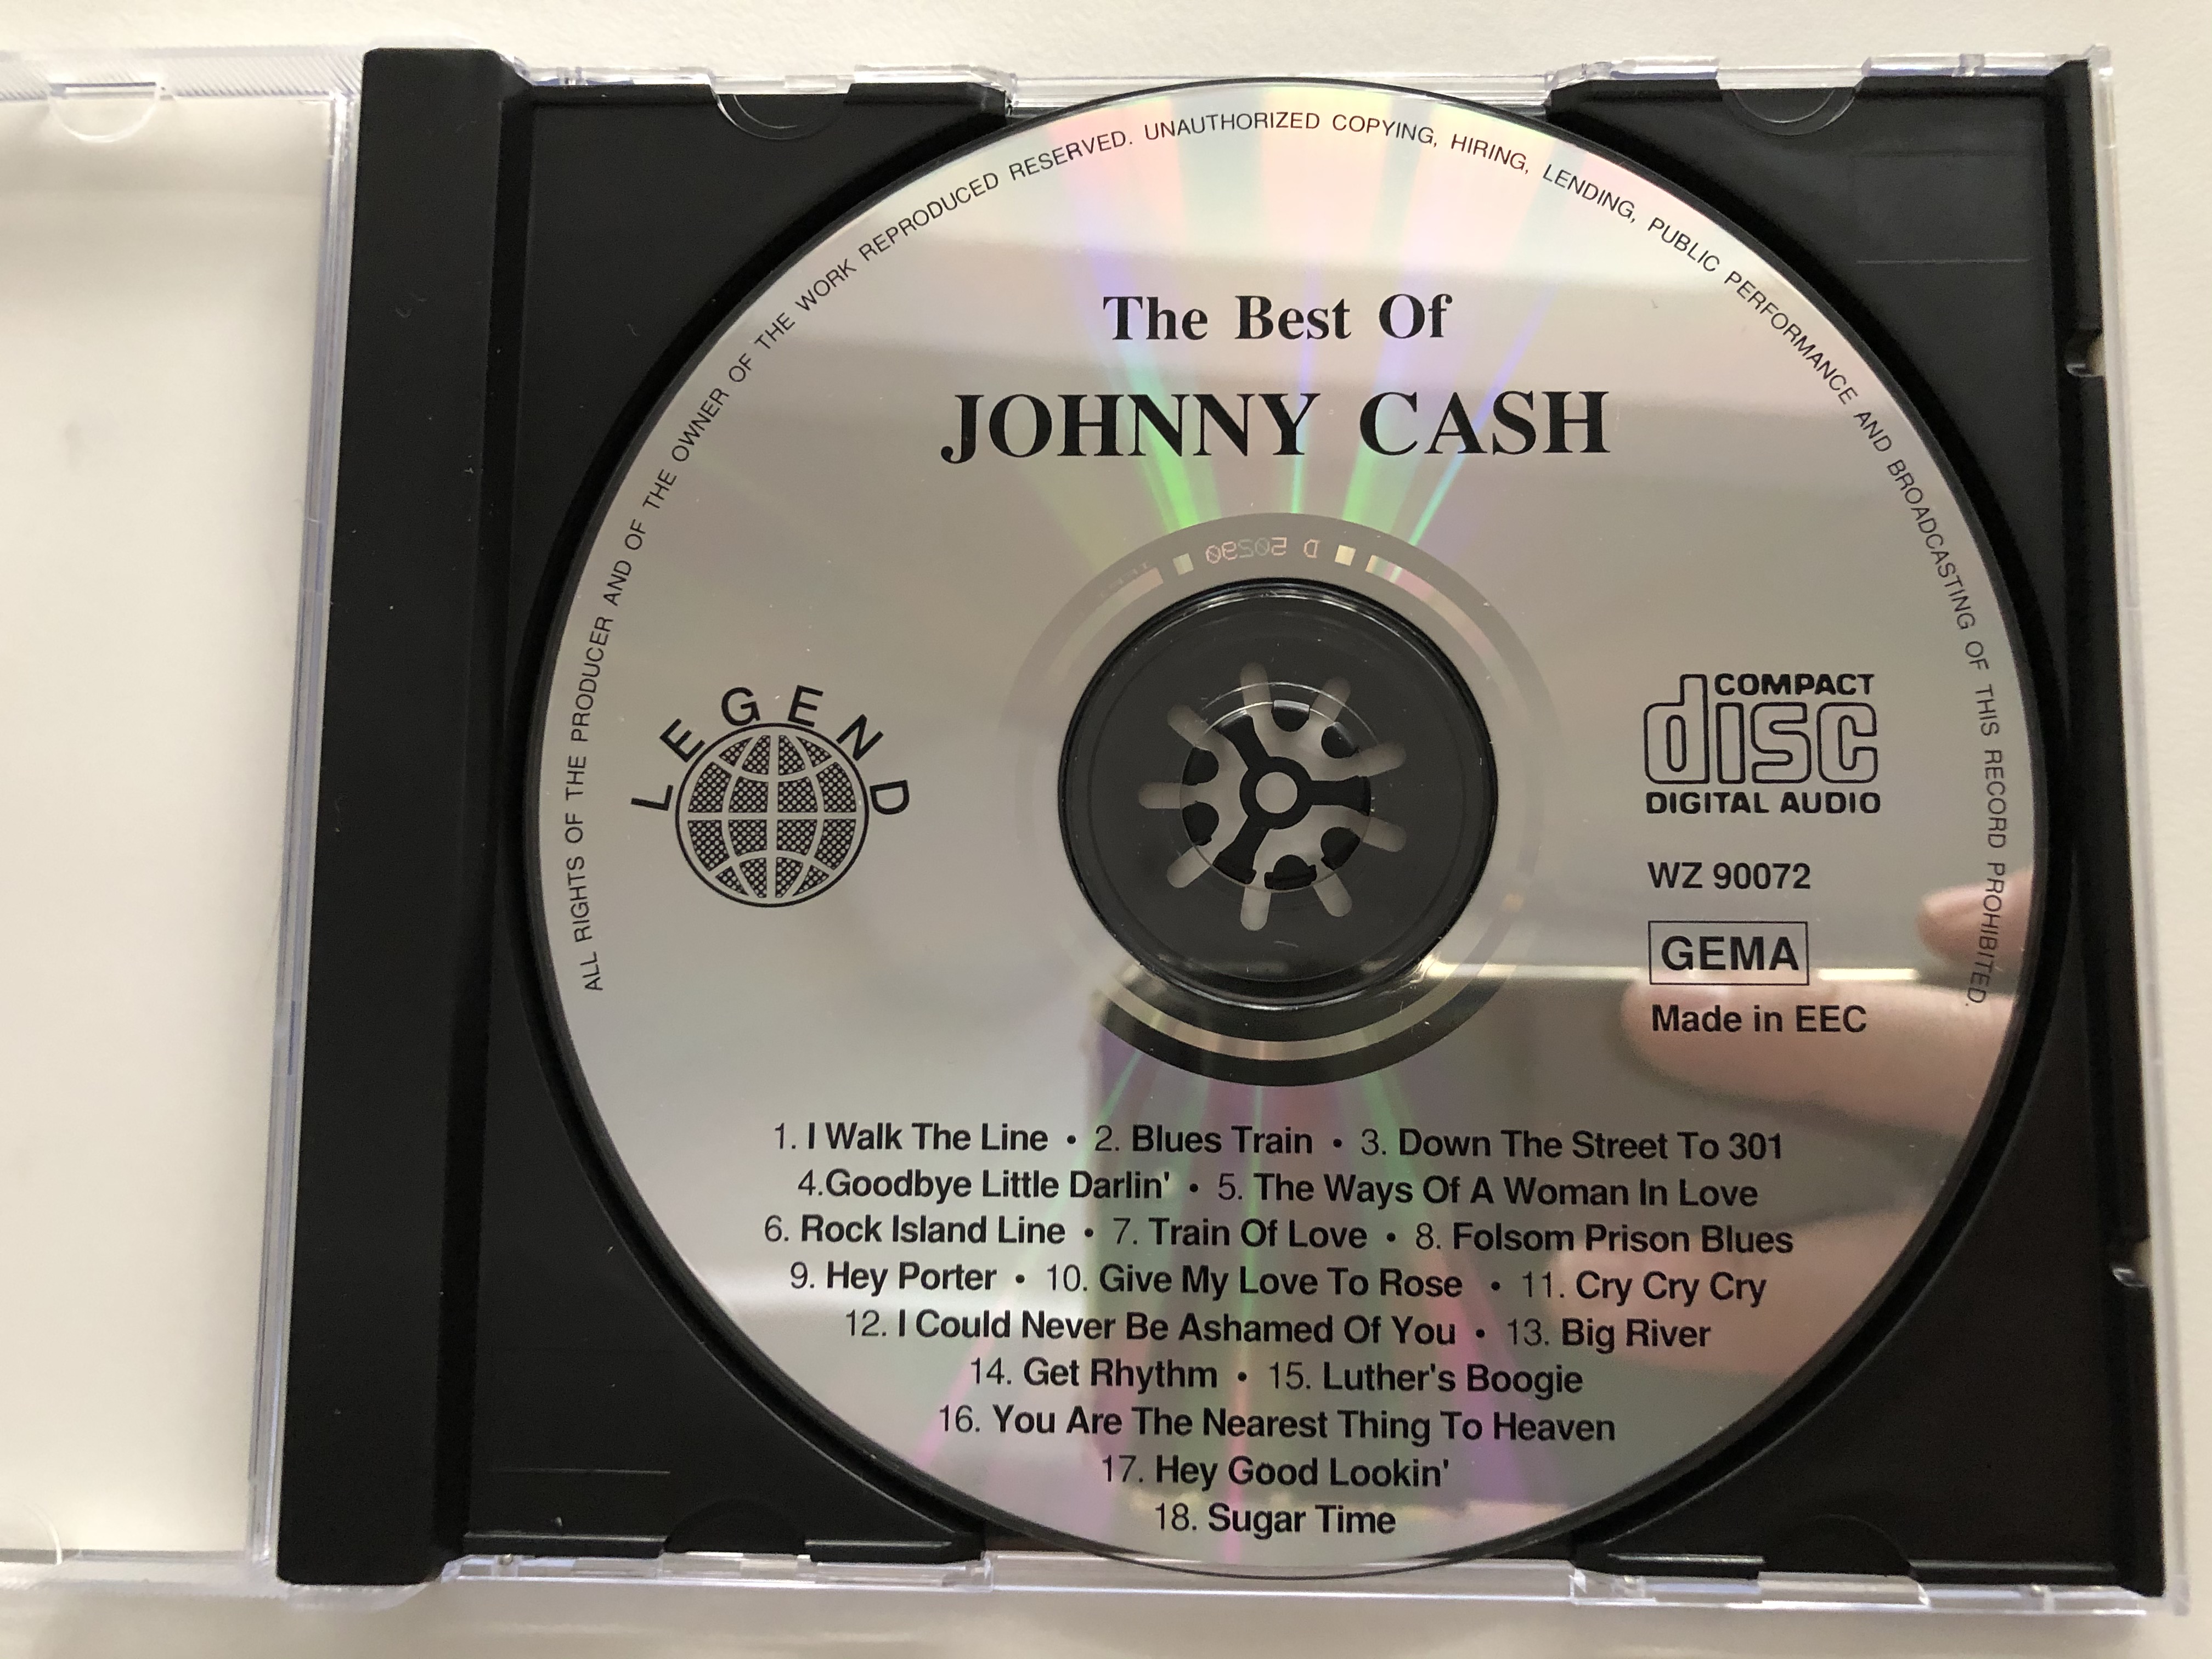 the-best-of-johnny-cash-i-walk-the-line-rock-island-line-hey-porter-hey-good-lookin-and-many-more...-wz-tontr-ger-vertriebs-gmbh-audio-cd-1993-wz-90072-2-.jpg